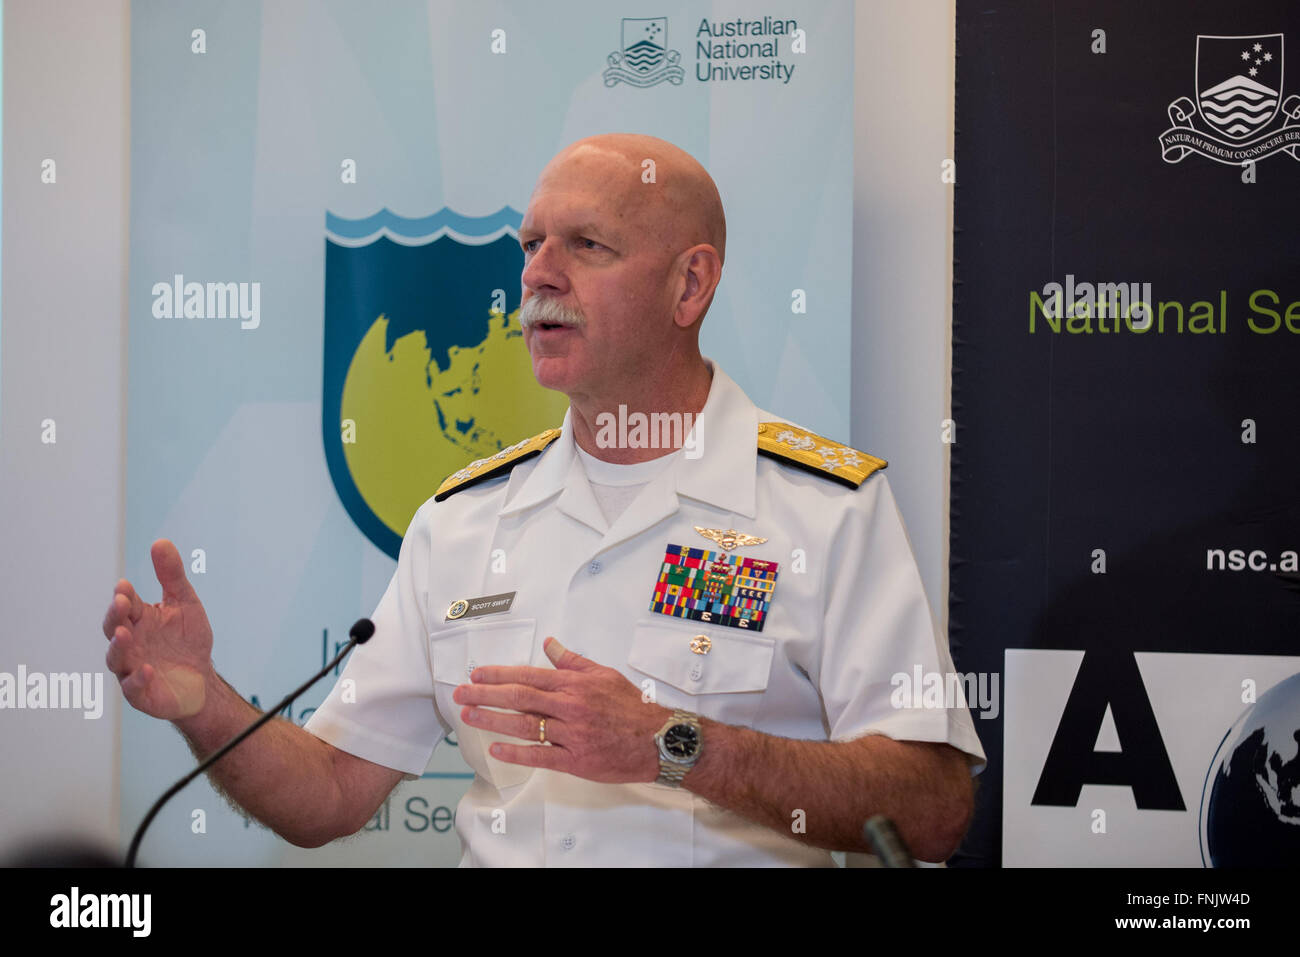 Canberra, Australia. 16th Mar, 2016. U.S. Pacific Fleet Commander Scott Swift delivers a speech at the Indo-Pacific Maritime Security Conference hosted by the Australia National University's National Security College in Canberra, Australia, March 16, 2016. © Justin Qian/Xinhua/Alamy Live News Stock Photo